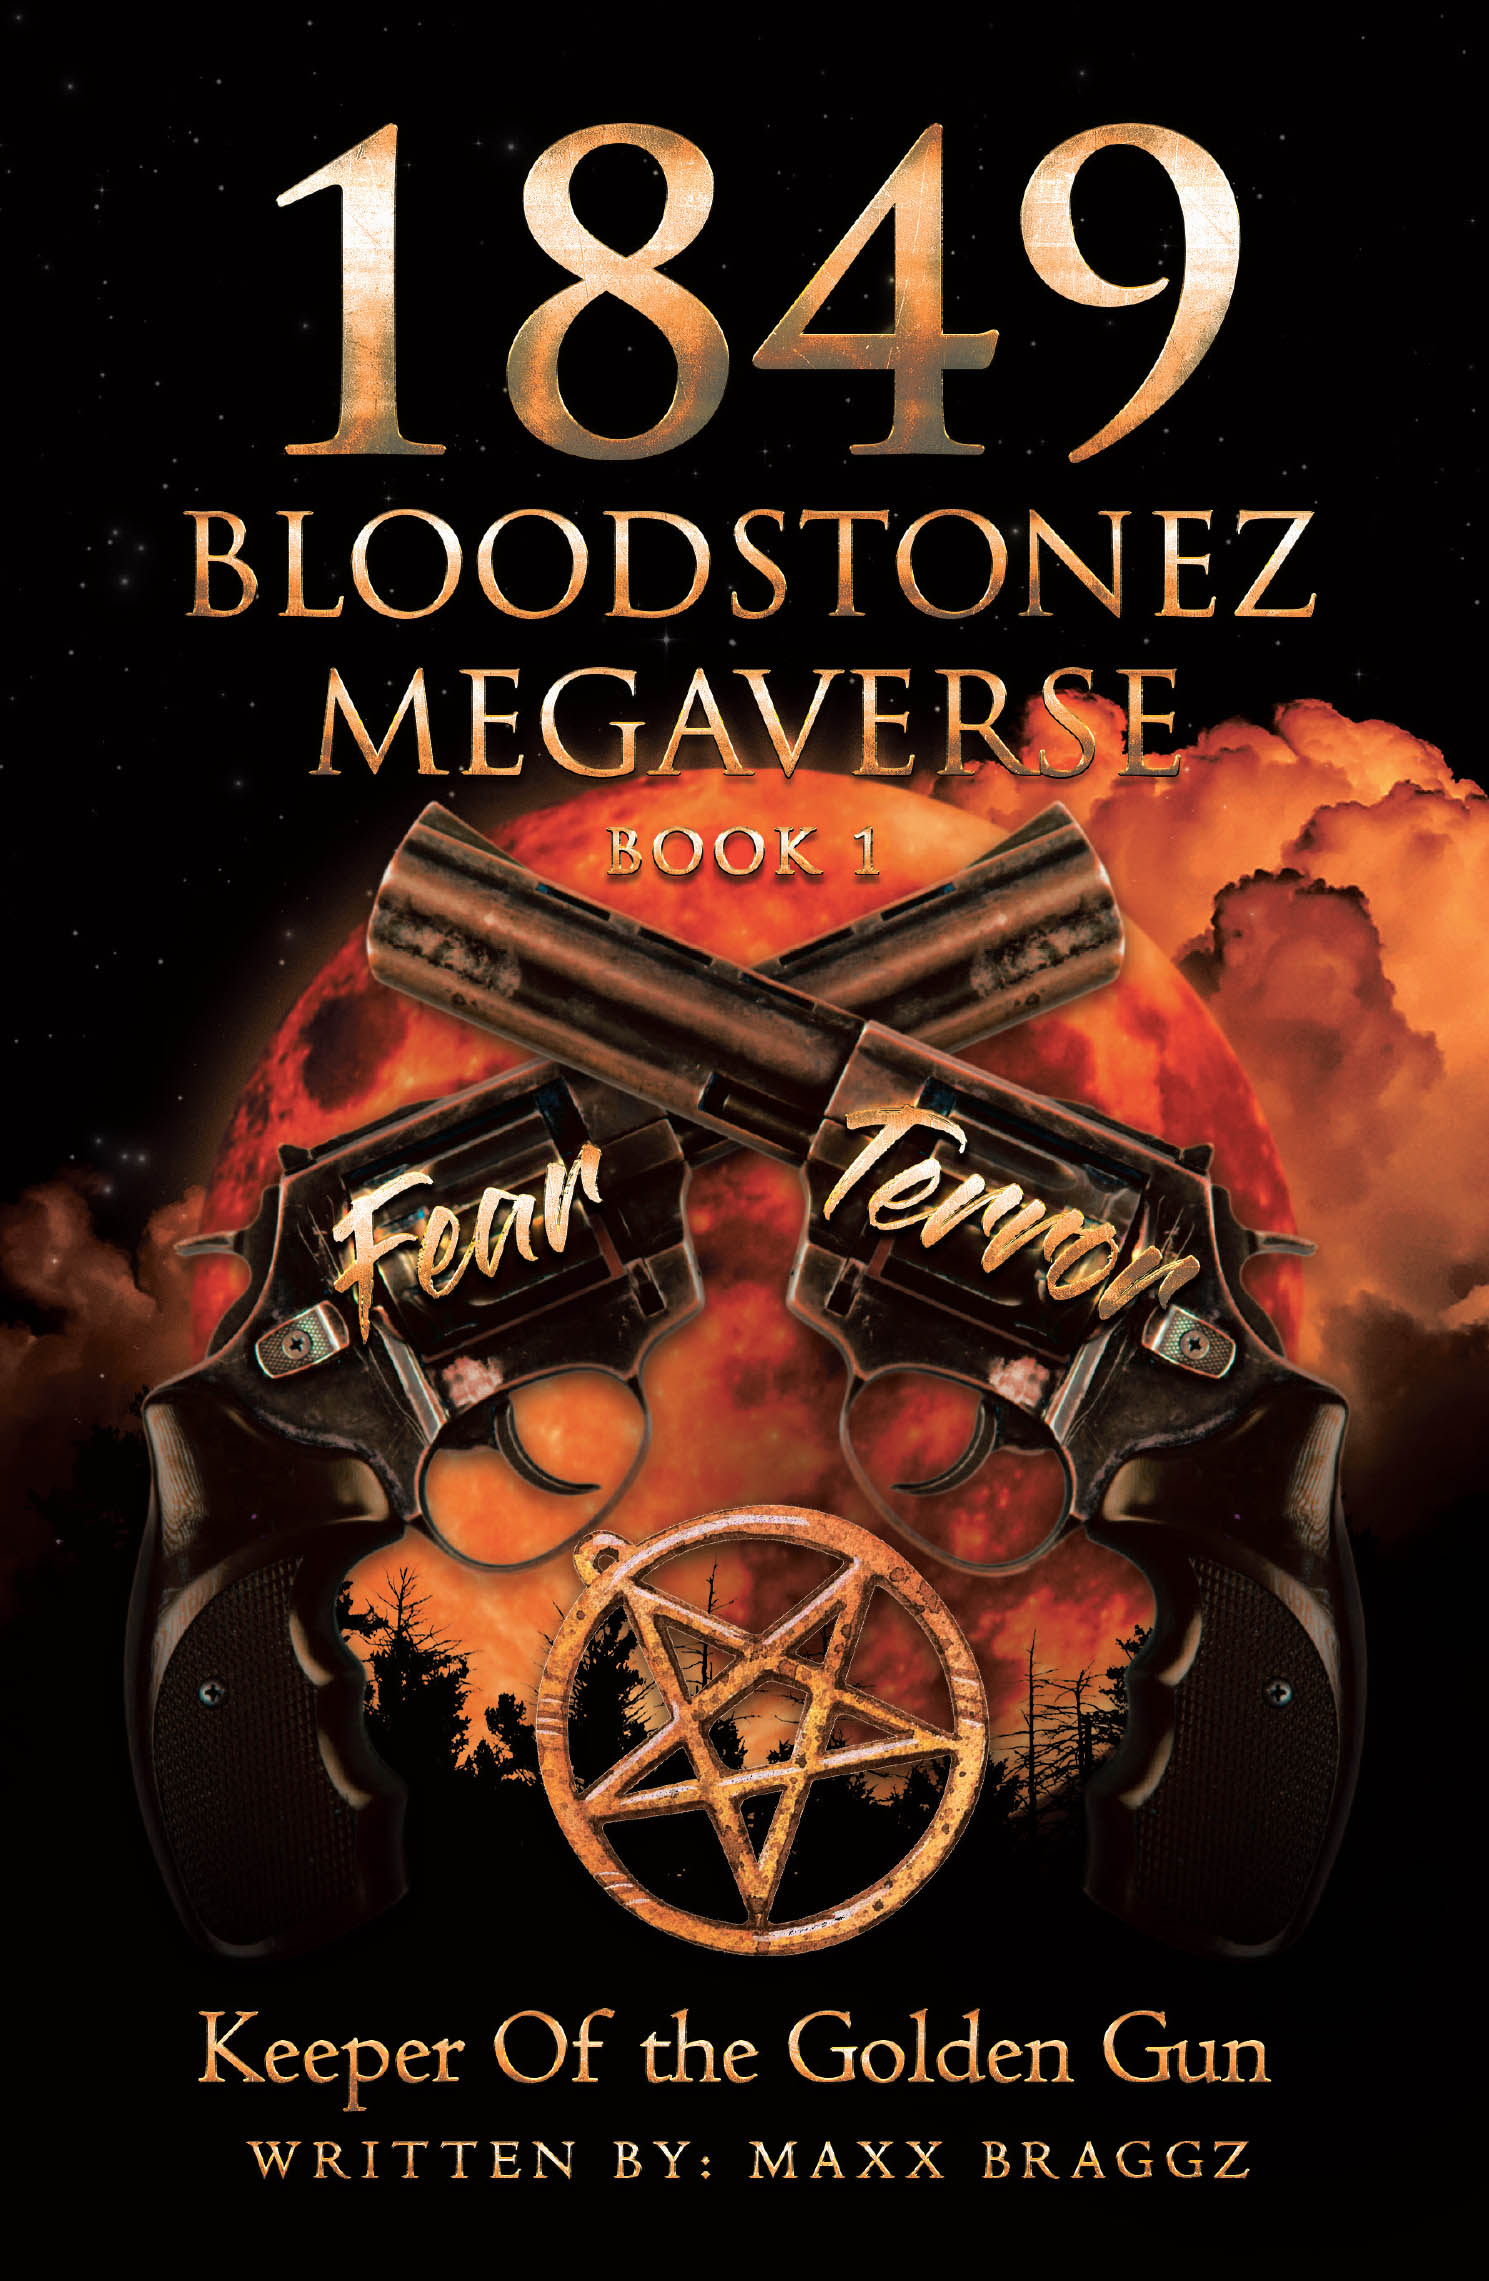 Author Maxx Braggz’s New Book, "1849 Bloodstonez Megaverse: Book 1," is a Gripping Tale That Invites Readers to Step Into a Spellbinding World of Fantasy and Adventure